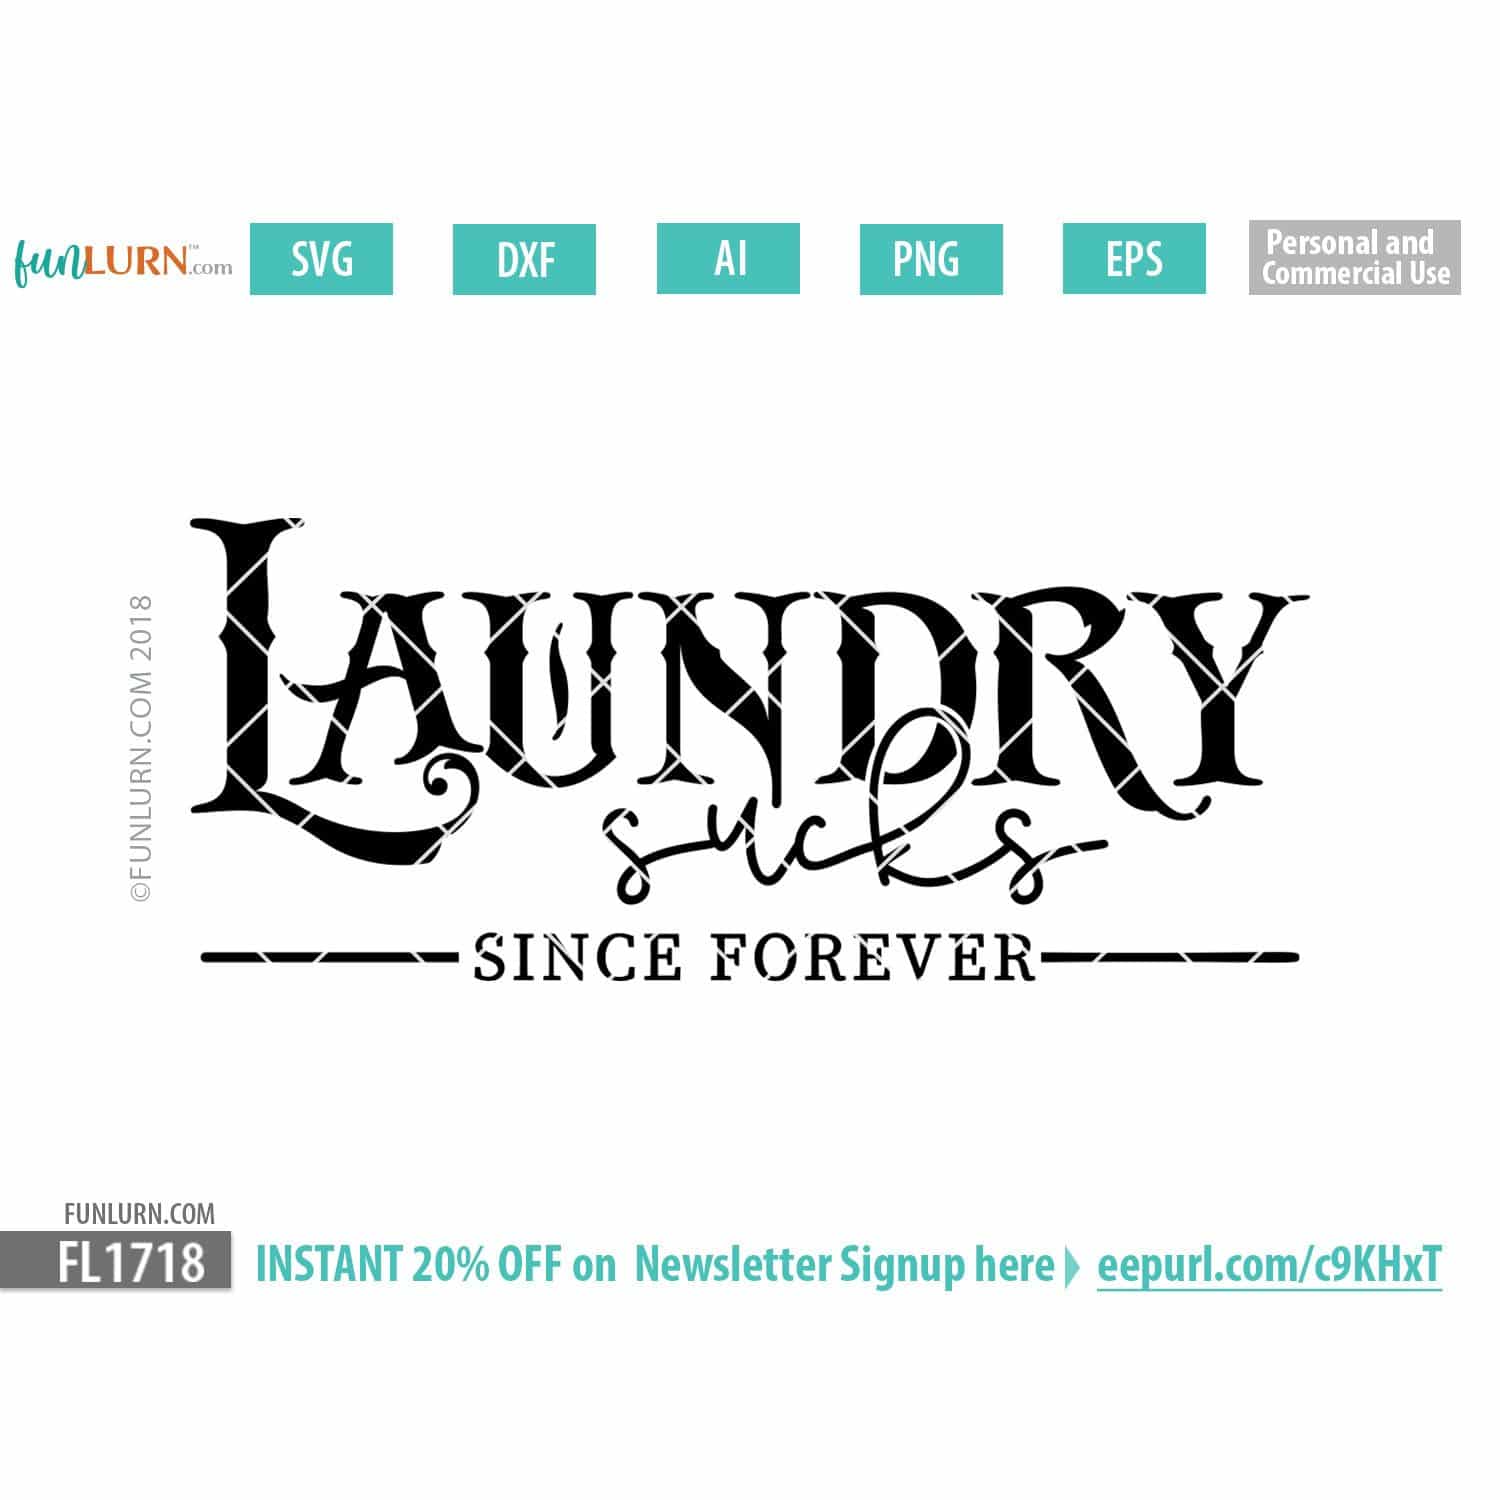 Download Download Laundry Room Free Svg Gif Free SVG files ...